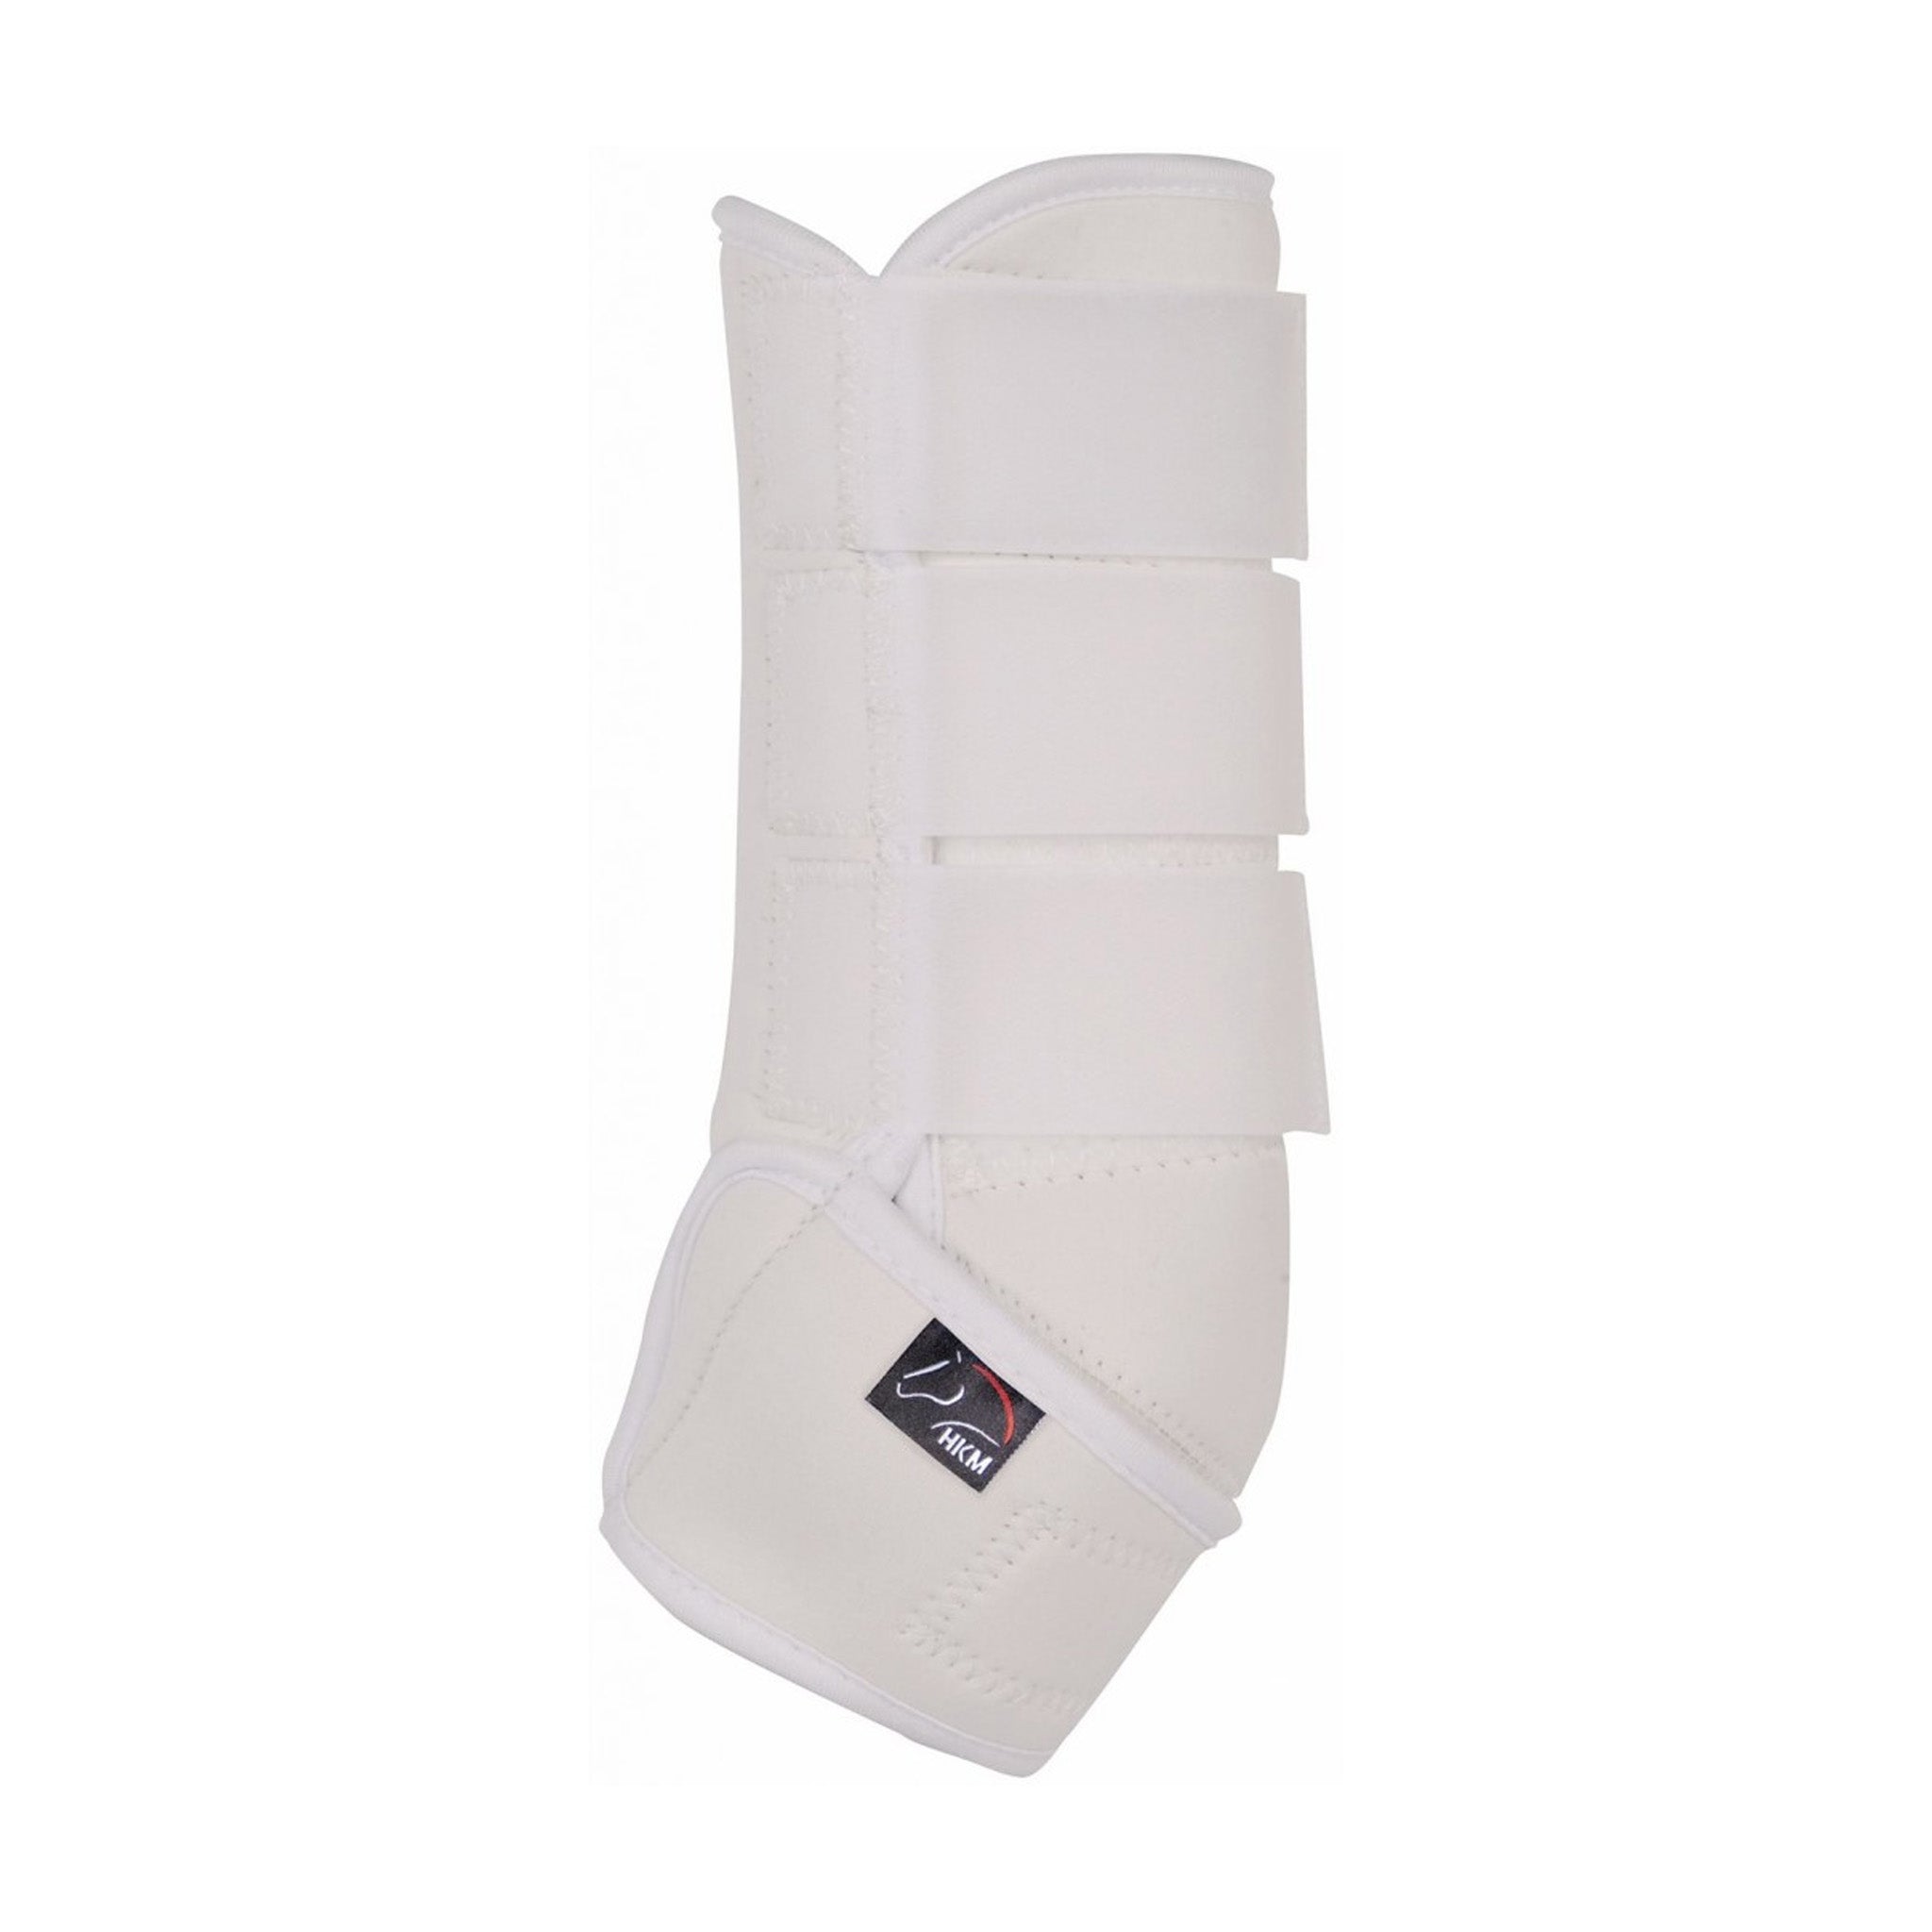 HKM Colour Neoprene Protection Boots in White 2749